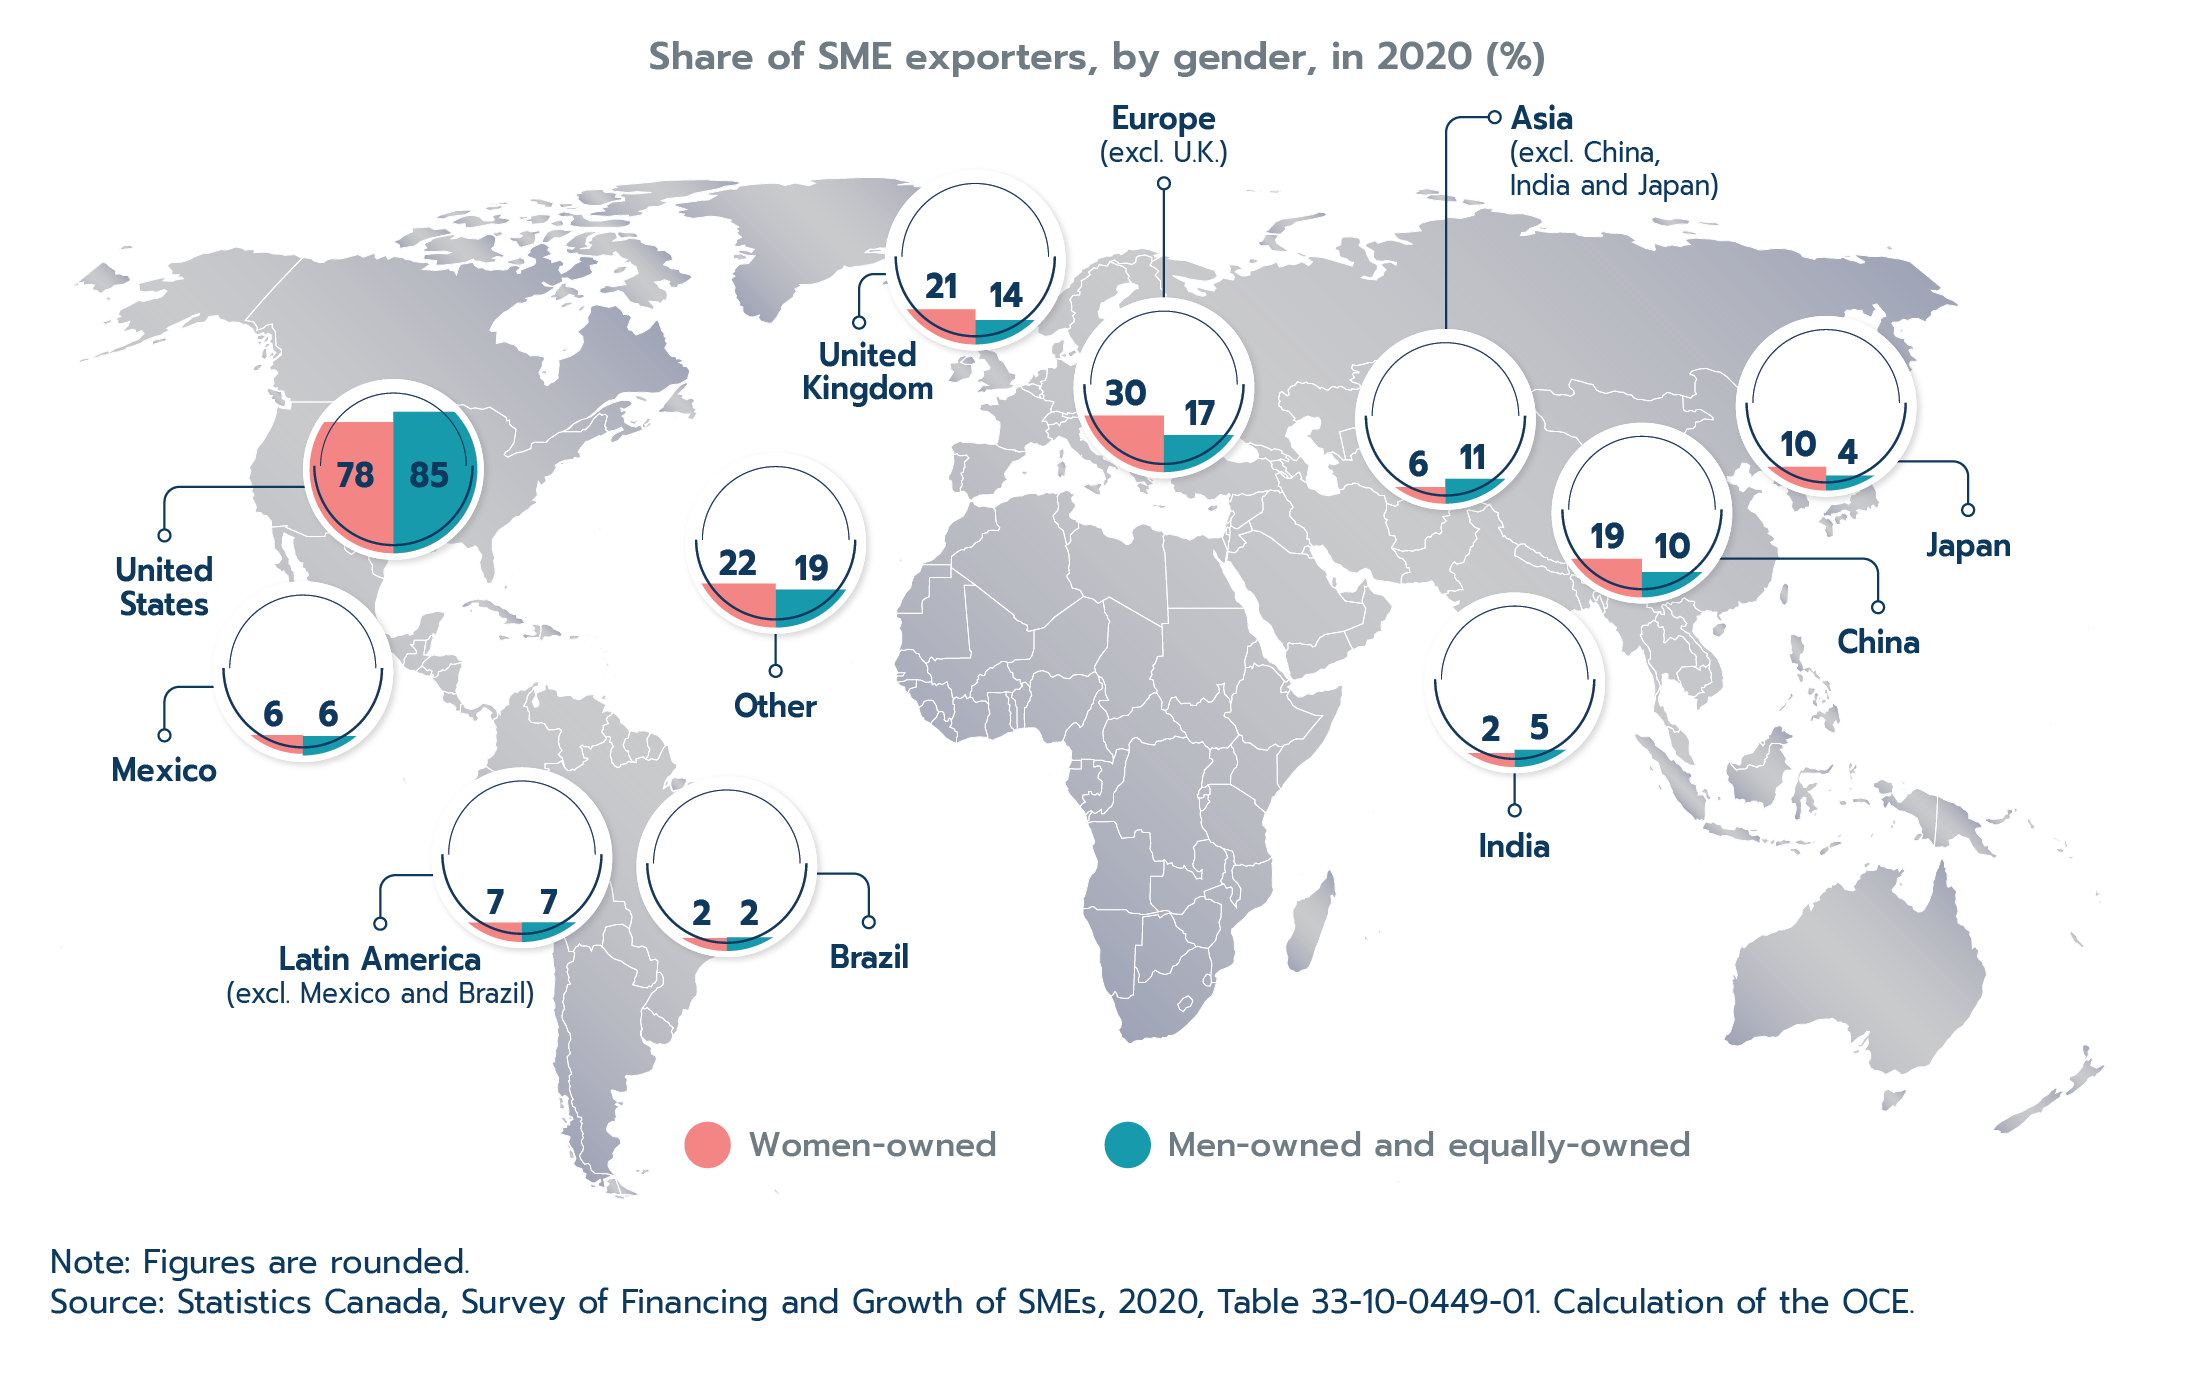 Figure 2.20: Women-owned SMEs export to slightly more diverse markets